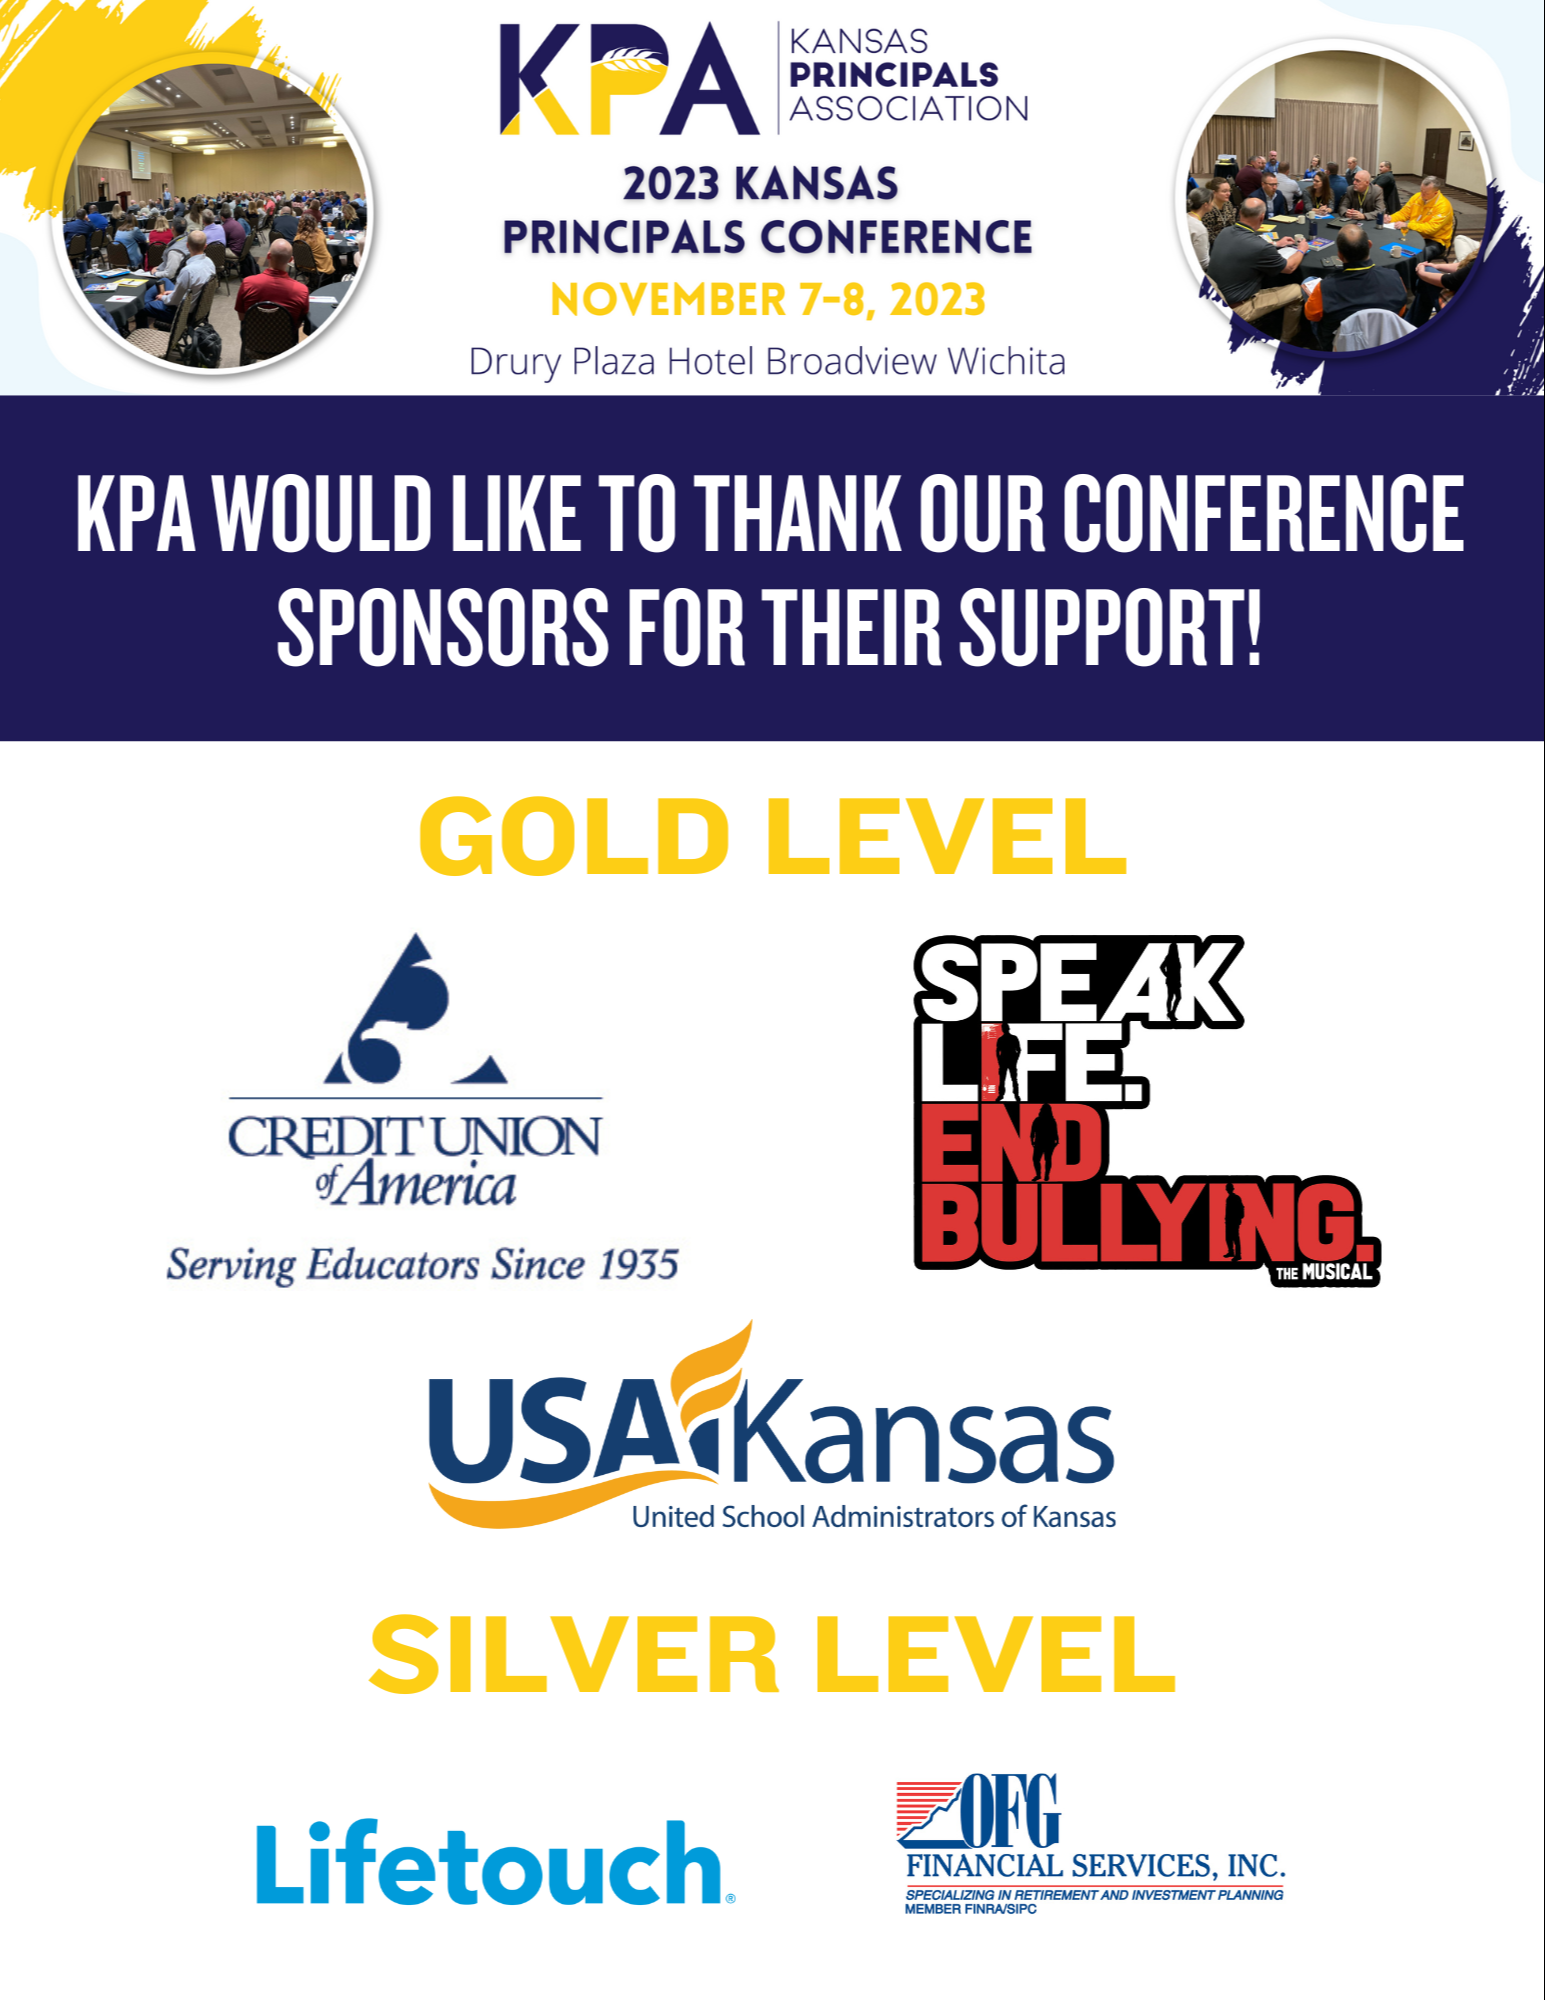 KPA Would Like to Thank Our Sponsors for Their Support